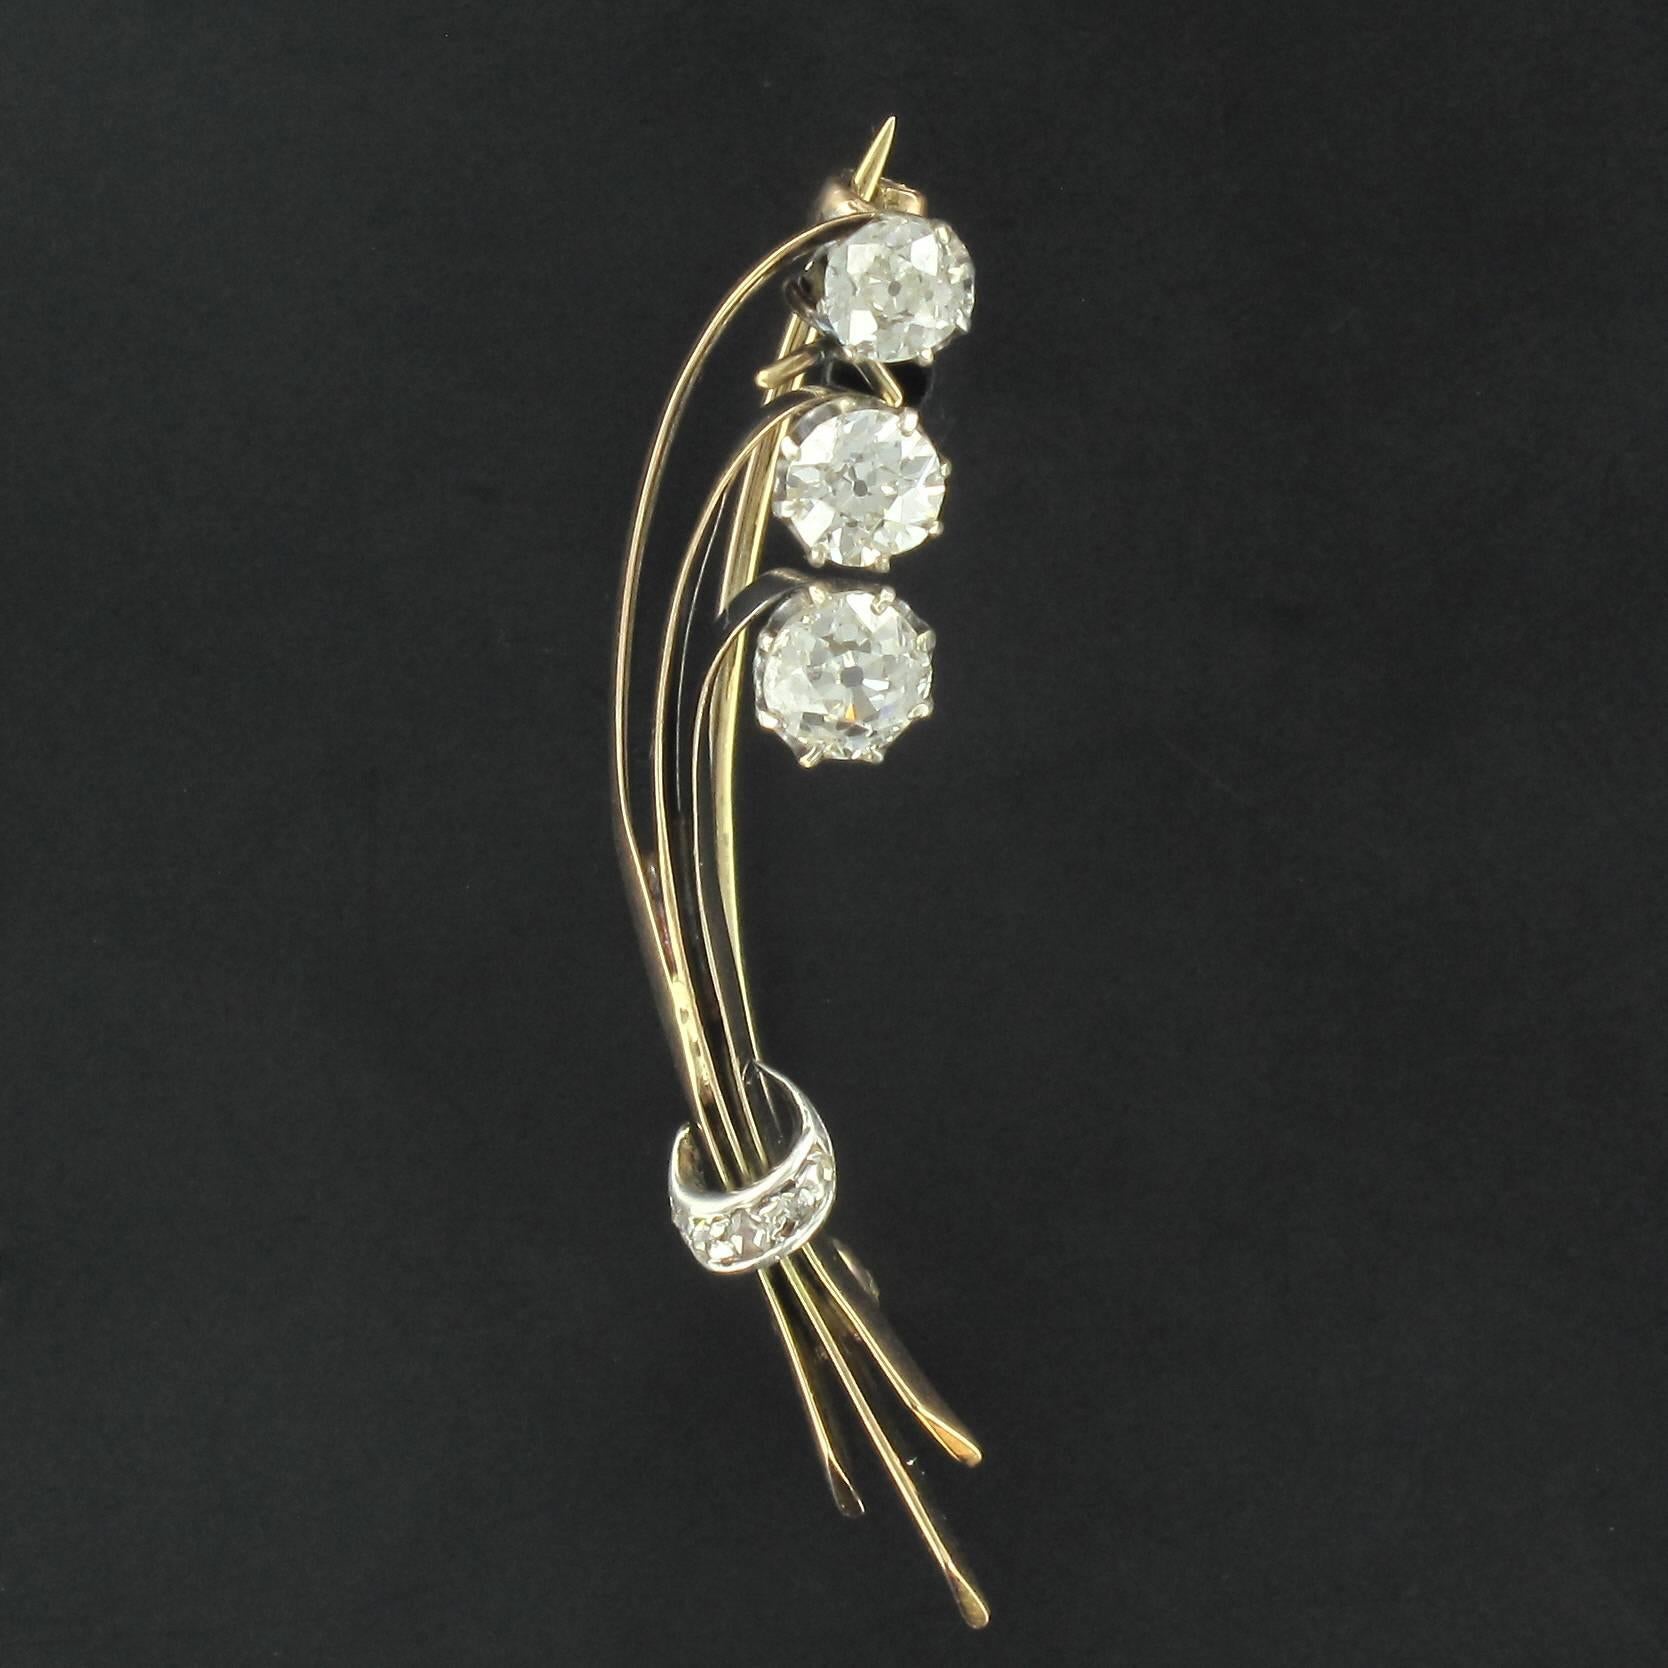 Brooch in 18 carat yellow gold, eagle head hallmark and silver.  

This brooch in the form of a bunch of flowers is claw set with 3 brilliant cut diamonds. The stems are held at the base by a band set with diamonds. The clasp is a pin with a